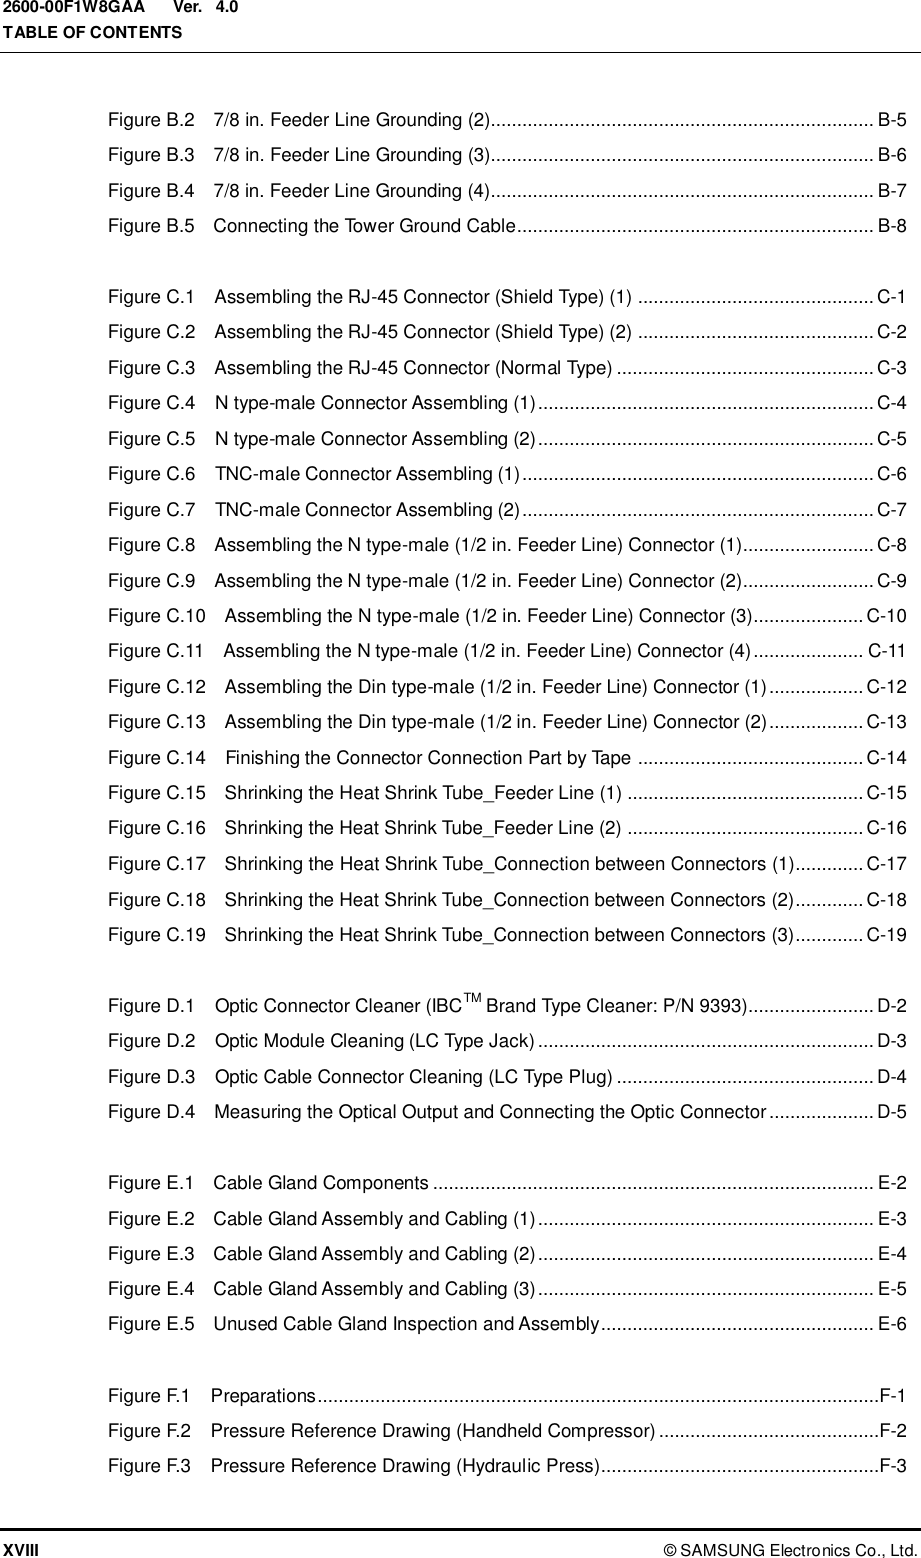  Ver.  TABLE OF CONTENTS XVIII ©  SAMSUNG Electronics Co., Ltd. 2600-00F1W8GAA 4.0 Figure B.2    7/8 in. Feeder Line Grounding (2)......................................................................... B-5 Figure B.3    7/8 in. Feeder Line Grounding (3)......................................................................... B-6 Figure B.4    7/8 in. Feeder Line Grounding (4)......................................................................... B-7 Figure B.5    Connecting the Tower Ground Cable .................................................................... B-8  Figure C.1    Assembling the RJ-45 Connector (Shield Type) (1) ............................................. C-1 Figure C.2    Assembling the RJ-45 Connector (Shield Type) (2) ............................................. C-2 Figure C.3    Assembling the RJ-45 Connector (Normal Type) ................................................. C-3 Figure C.4    N type-male Connector Assembling (1) ................................................................ C-4 Figure C.5    N type-male Connector Assembling (2) ................................................................ C-5 Figure C.6    TNC-male Connector Assembling (1) ................................................................... C-6 Figure C.7    TNC-male Connector Assembling (2) ................................................................... C-7 Figure C.8    Assembling the N type-male (1/2 in. Feeder Line) Connector (1)......................... C-8 Figure C.9    Assembling the N type-male (1/2 in. Feeder Line) Connector (2)......................... C-9 Figure C.10    Assembling the N type-male (1/2 in. Feeder Line) Connector (3)..................... C-10 Figure C.11    Assembling the N type-male (1/2 in. Feeder Line) Connector (4) ..................... C-11 Figure C.12    Assembling the Din type-male (1/2 in. Feeder Line) Connector (1) .................. C-12 Figure C.13    Assembling the Din type-male (1/2 in. Feeder Line) Connector (2) .................. C-13 Figure C.14    Finishing the Connector Connection Part by Tape ........................................... C-14 Figure C.15    Shrinking the Heat Shrink Tube_Feeder Line (1) ............................................. C-15 Figure C.16    Shrinking the Heat Shrink Tube_Feeder Line (2) ............................................. C-16 Figure C.17    Shrinking the Heat Shrink Tube_Connection between Connectors (1)............. C-17 Figure C.18    Shrinking the Heat Shrink Tube_Connection between Connectors (2)............. C-18 Figure C.19    Shrinking the Heat Shrink Tube_Connection between Connectors (3)............. C-19  Figure D.1    Optic Connector Cleaner (IBCTM Brand Type Cleaner: P/N 9393)........................ D-2 Figure D.2    Optic Module Cleaning (LC Type Jack) ................................................................ D-3 Figure D.3    Optic Cable Connector Cleaning (LC Type Plug) ................................................. D-4 Figure D.4    Measuring the Optical Output and Connecting the Optic Connector .................... D-5  Figure E.1    Cable Gland Components .................................................................................... E-2 Figure E.2    Cable Gland Assembly and Cabling (1) ................................................................ E-3 Figure E.3    Cable Gland Assembly and Cabling (2) ................................................................ E-4 Figure E.4    Cable Gland Assembly and Cabling (3) ................................................................ E-5 Figure E.5    Unused Cable Gland Inspection and Assembly .................................................... E-6  Figure F.1    Preparations ...........................................................................................................F-1 Figure F.2    Pressure Reference Drawing (Handheld Compressor) ..........................................F-2 Figure F.3    Pressure Reference Drawing (Hydraulic Press) .....................................................F-3 